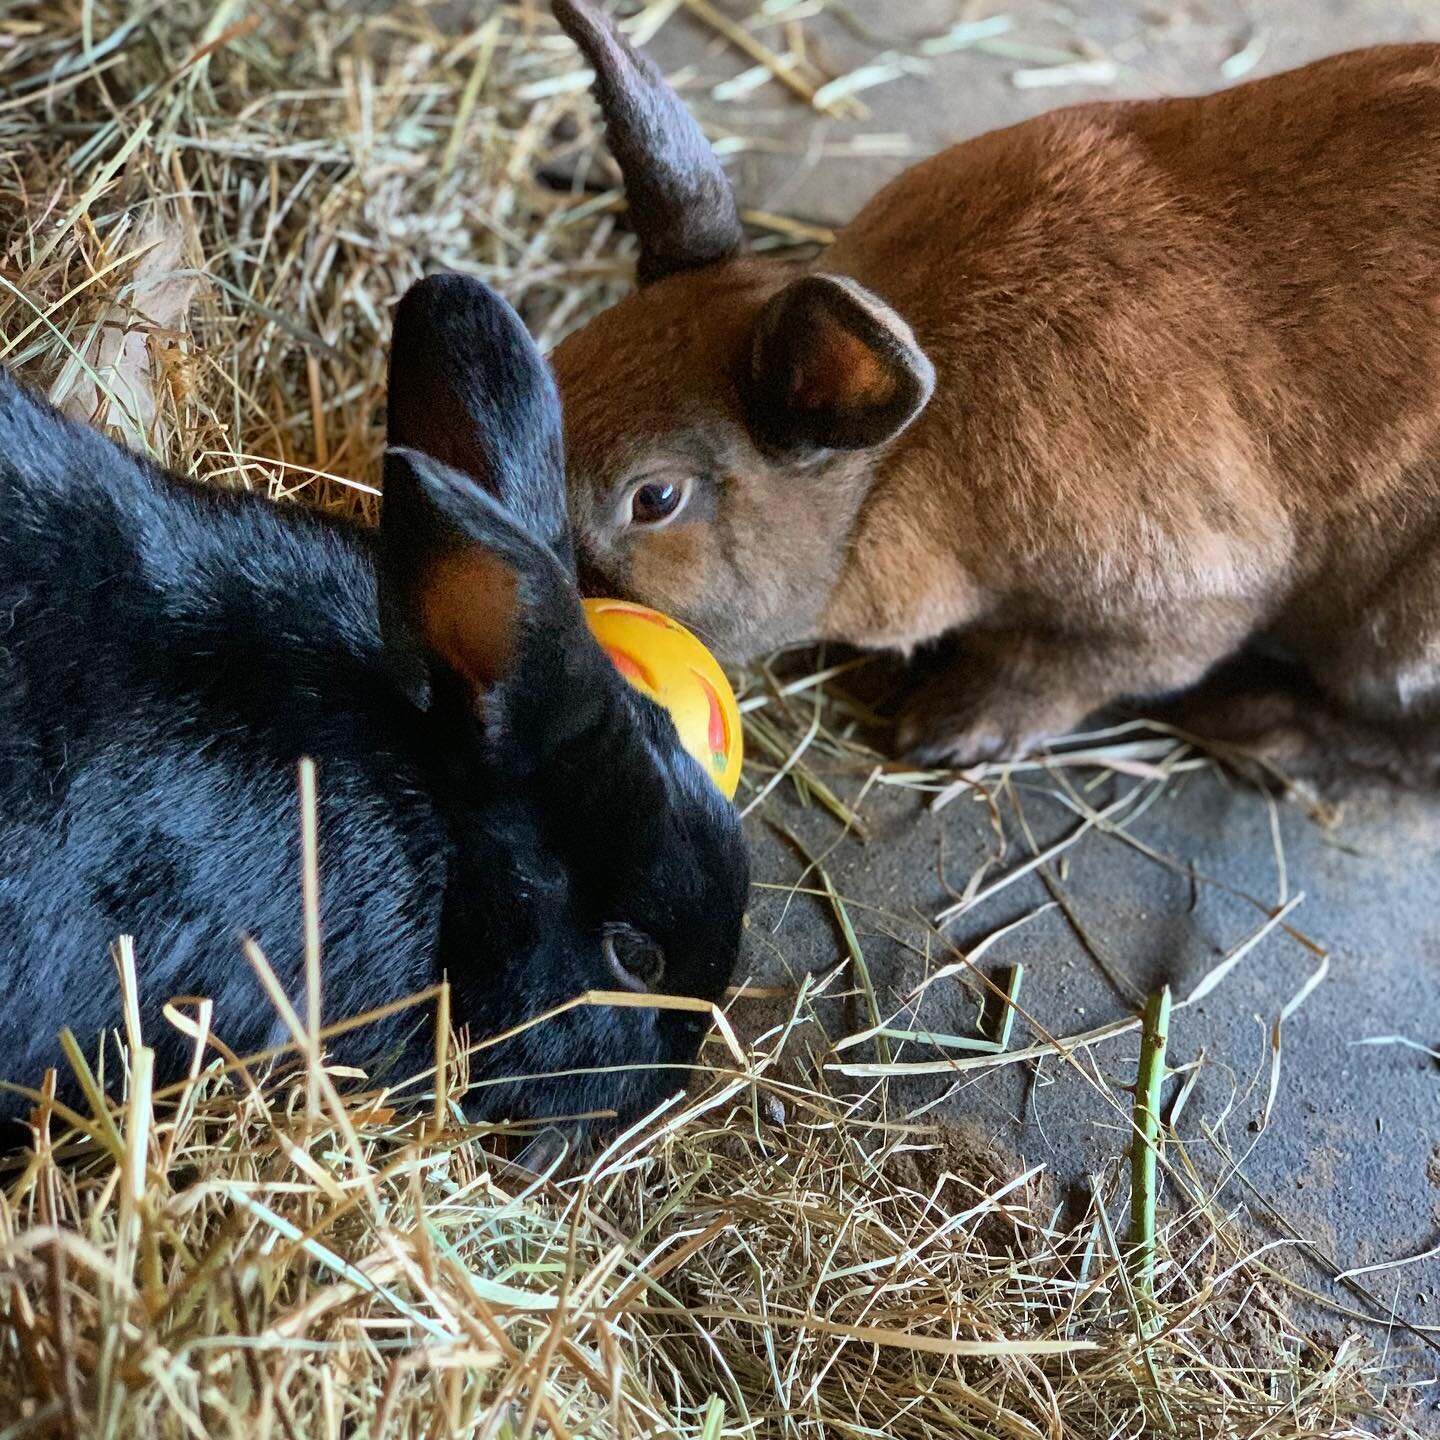 Rise n Shine ☀️It&rsquo;s time for breakfast/ treat ball style&hellip;
#bunnyenrichment #bunniesofinstagram #rabbitsofinstagram #rabbits #bunnylove #animalrescue #sanctuarylife